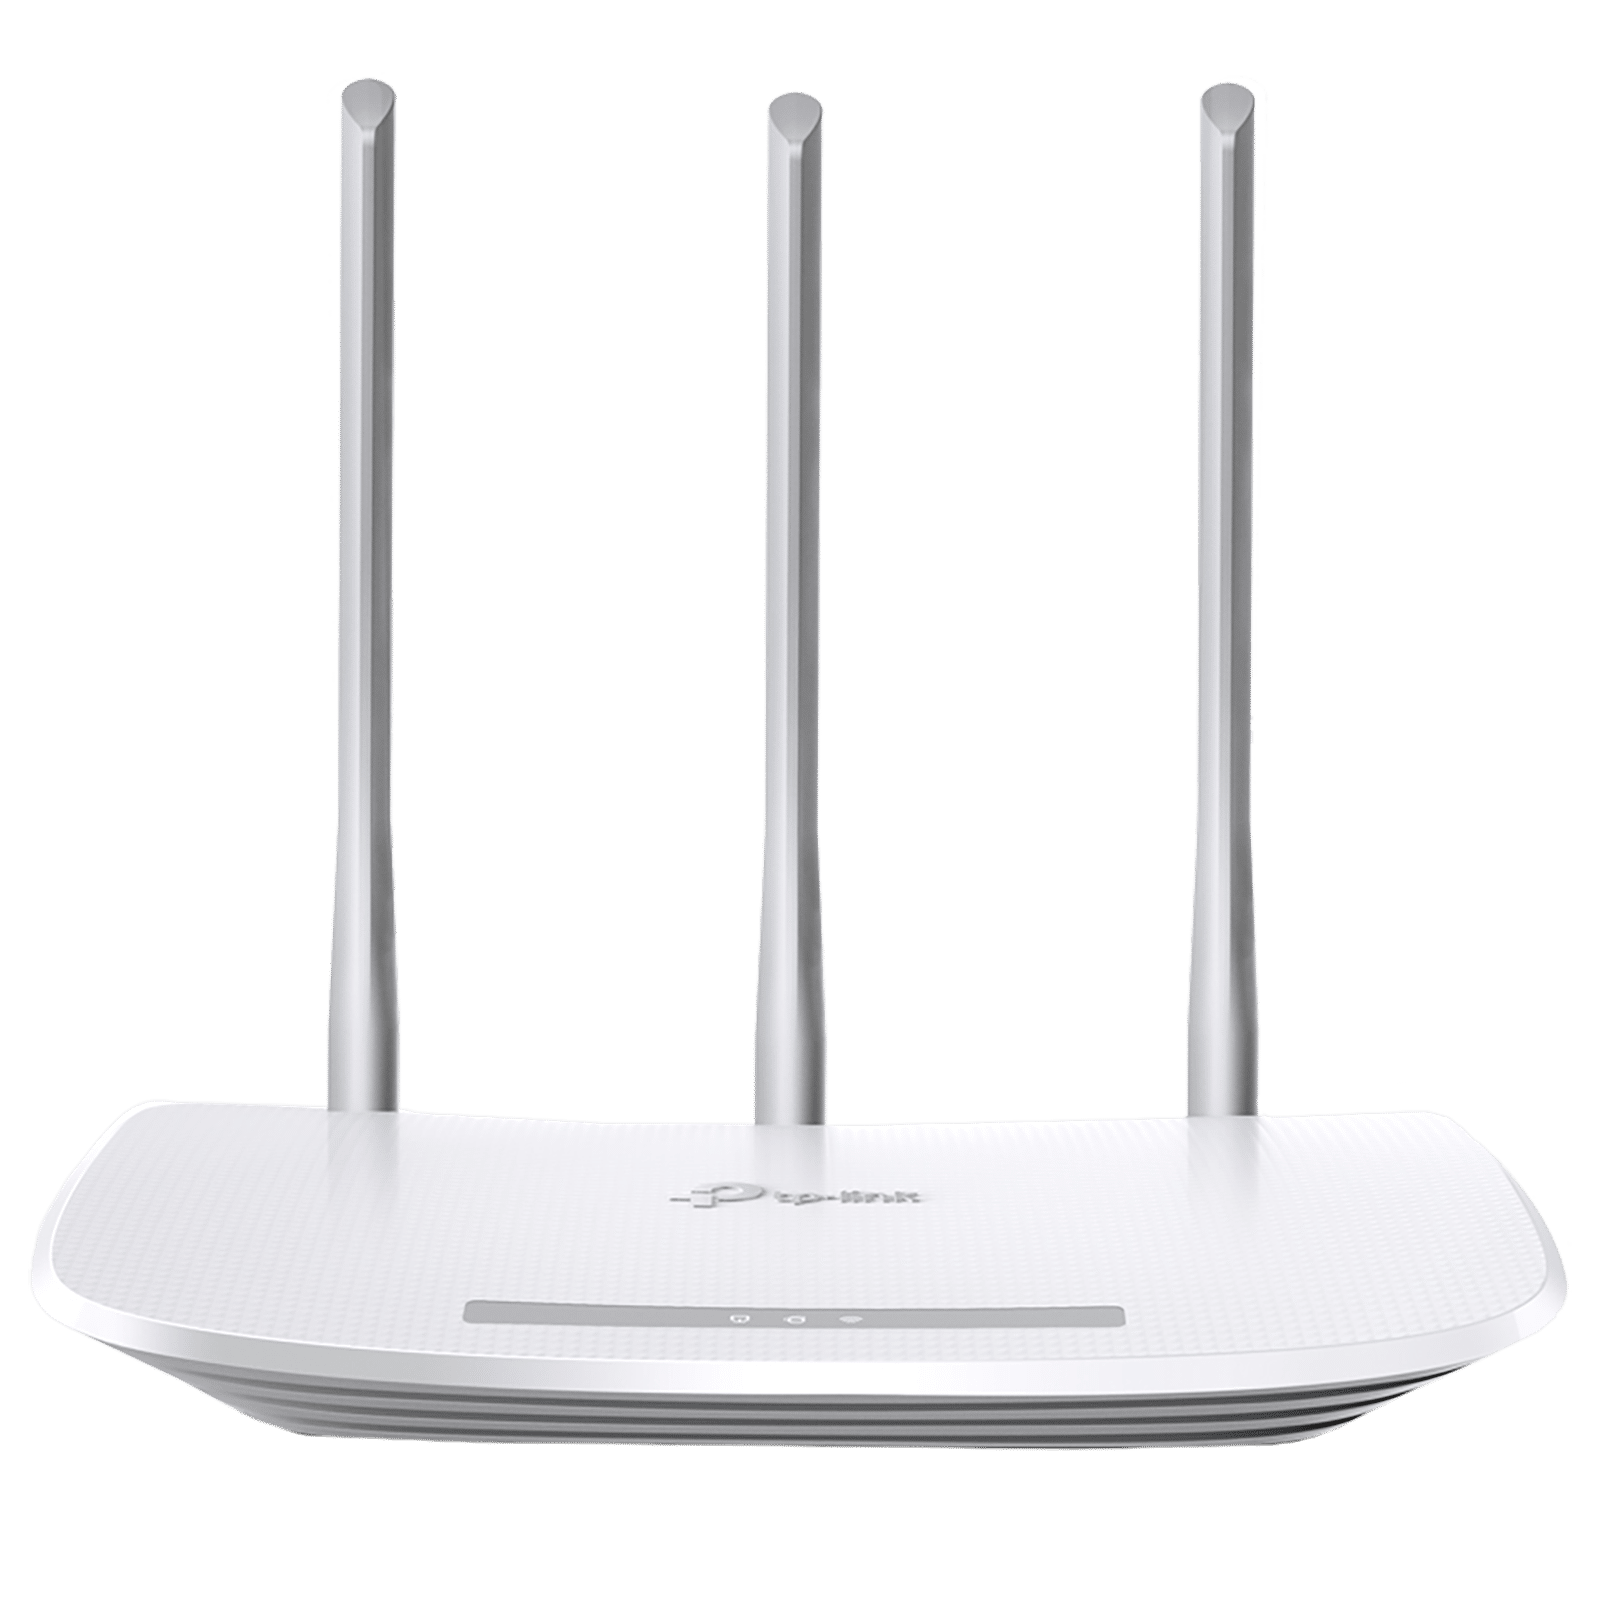 TP-Link N300 Wireless Extender, Wi-Fi Router (TL-WR841N) - 2 x 5dBi High  Power Antennas, Supports Access Point, WISP, Up to 300Mbps - Buy TP-Link  N300 Wireless Extender, Wi-Fi Router (TL-WR841N) - 2